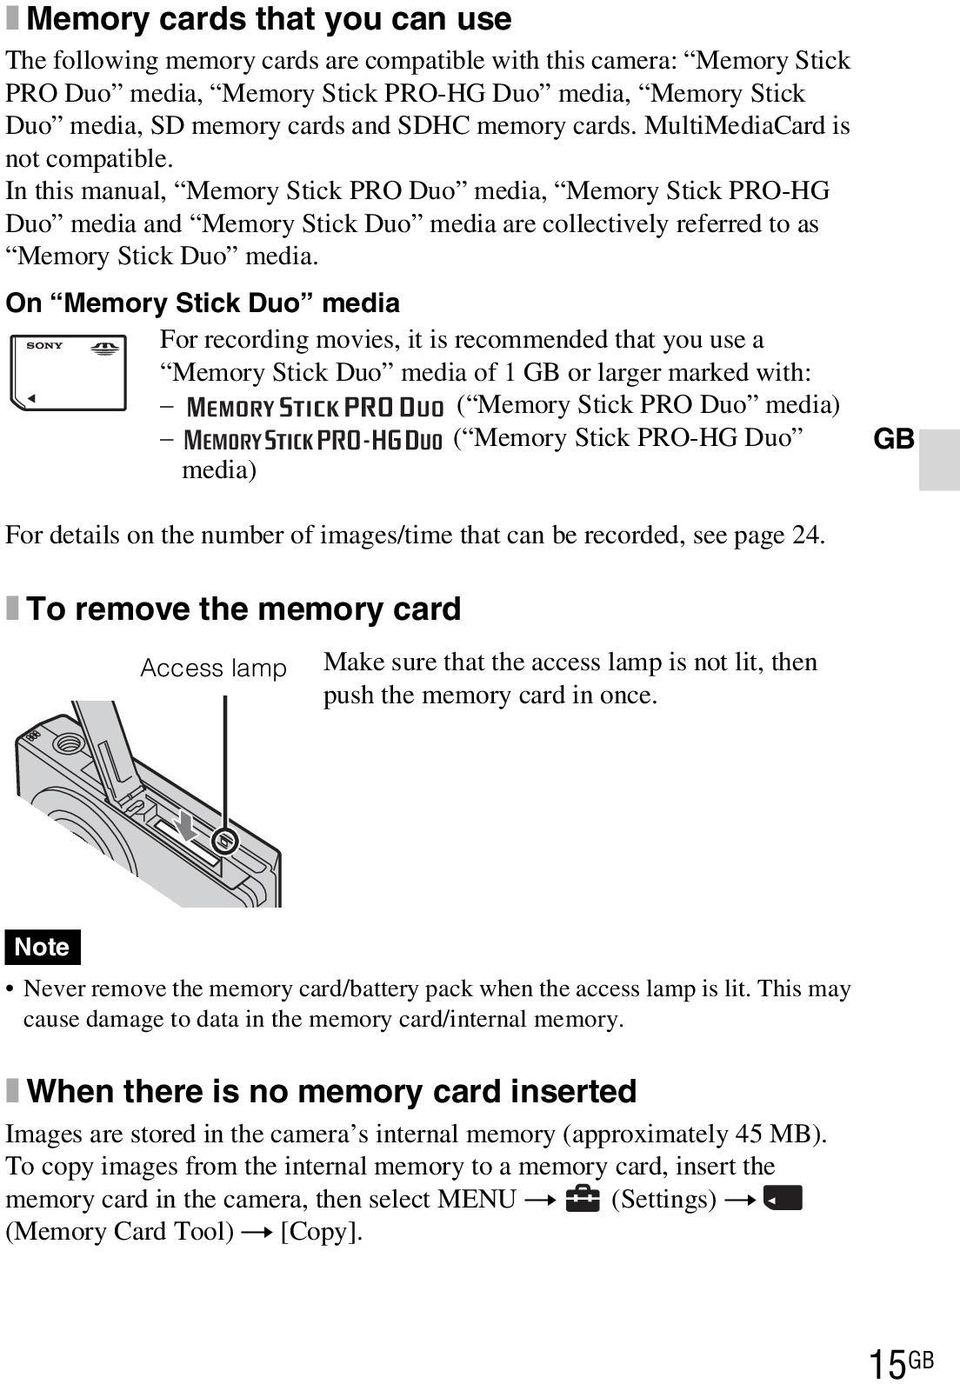 In this manual, Memory Stick PRO Duo media, Memory Stick PRO-HG Duo media and Memory Stick Duo media are collectively referred to as Memory Stick Duo media.